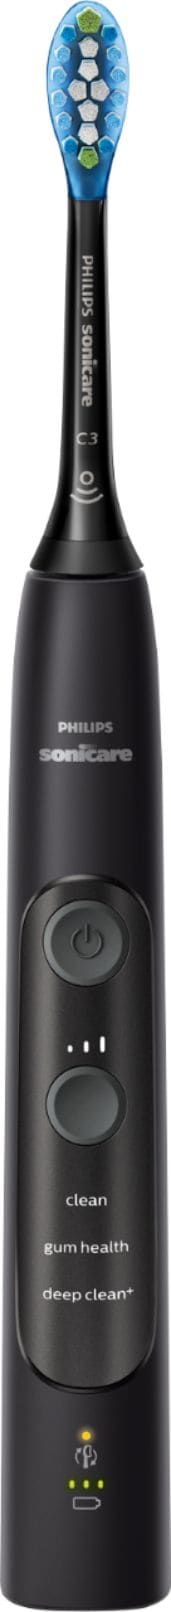 Philips Sonicare - Sonicare ExpertClean 7300 Rechargeable Toothbrush - Black_7